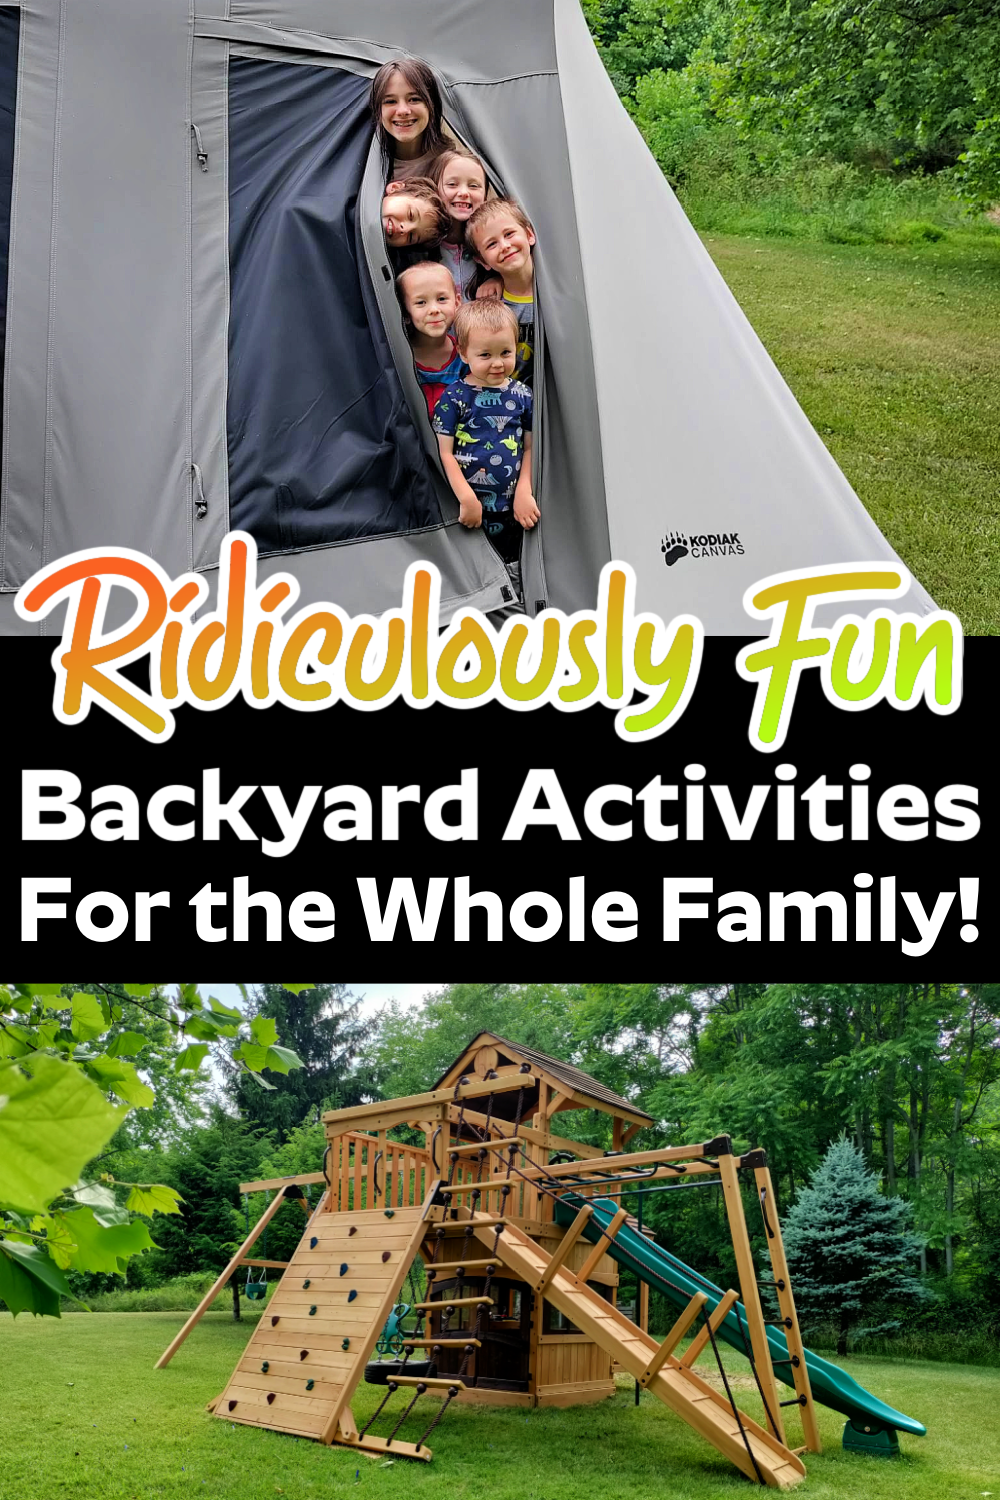 kids outside in a tent and a playground with a text overlay that says, "Ridiculously Fun Backyard Activities for the whole family"